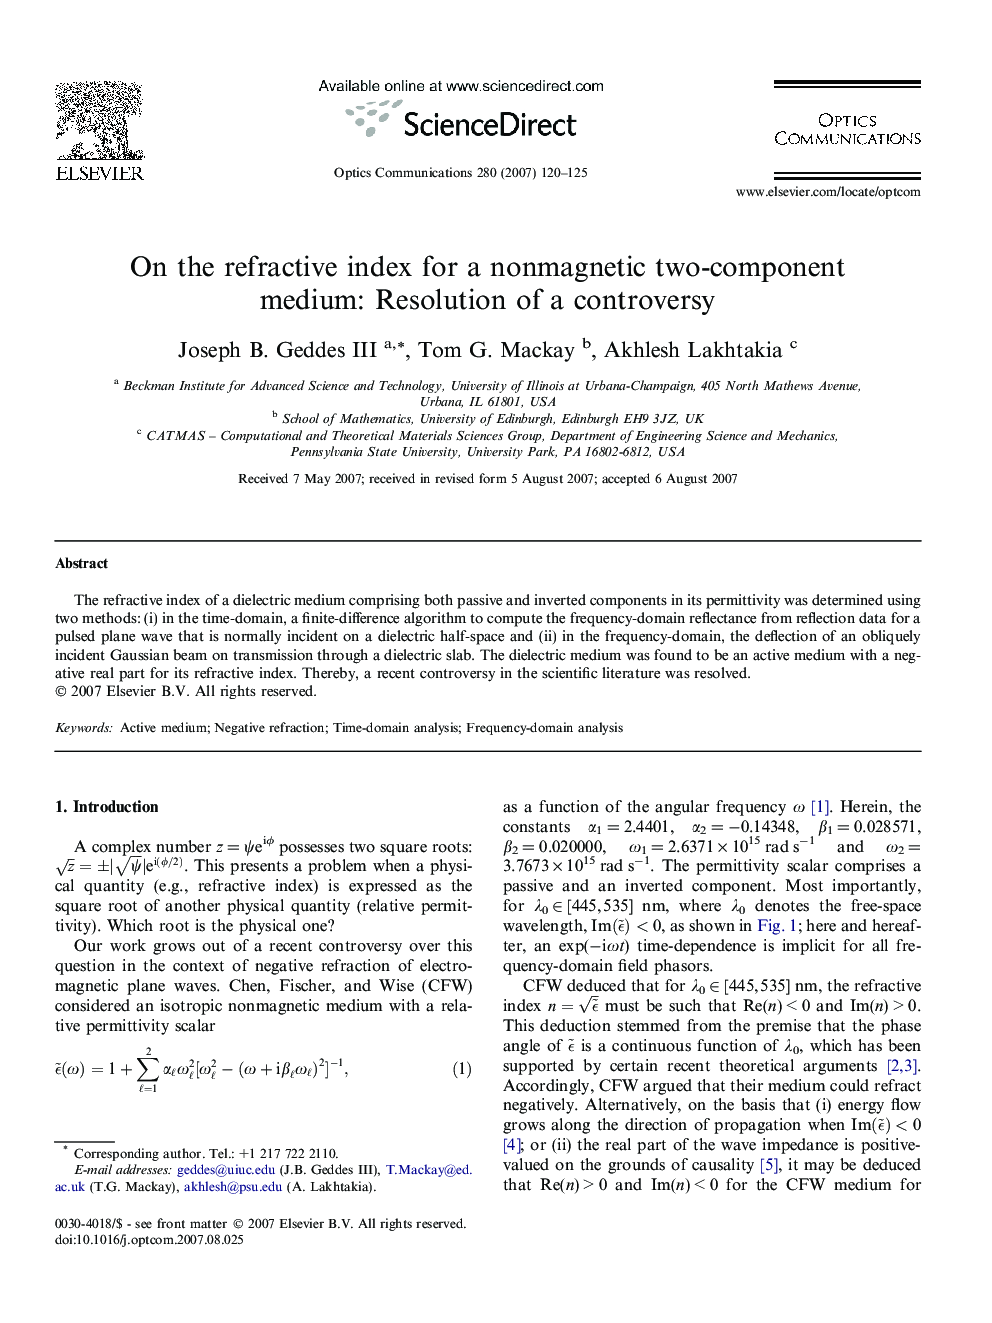 On the refractive index for a nonmagnetic two-component medium: Resolution of a controversy